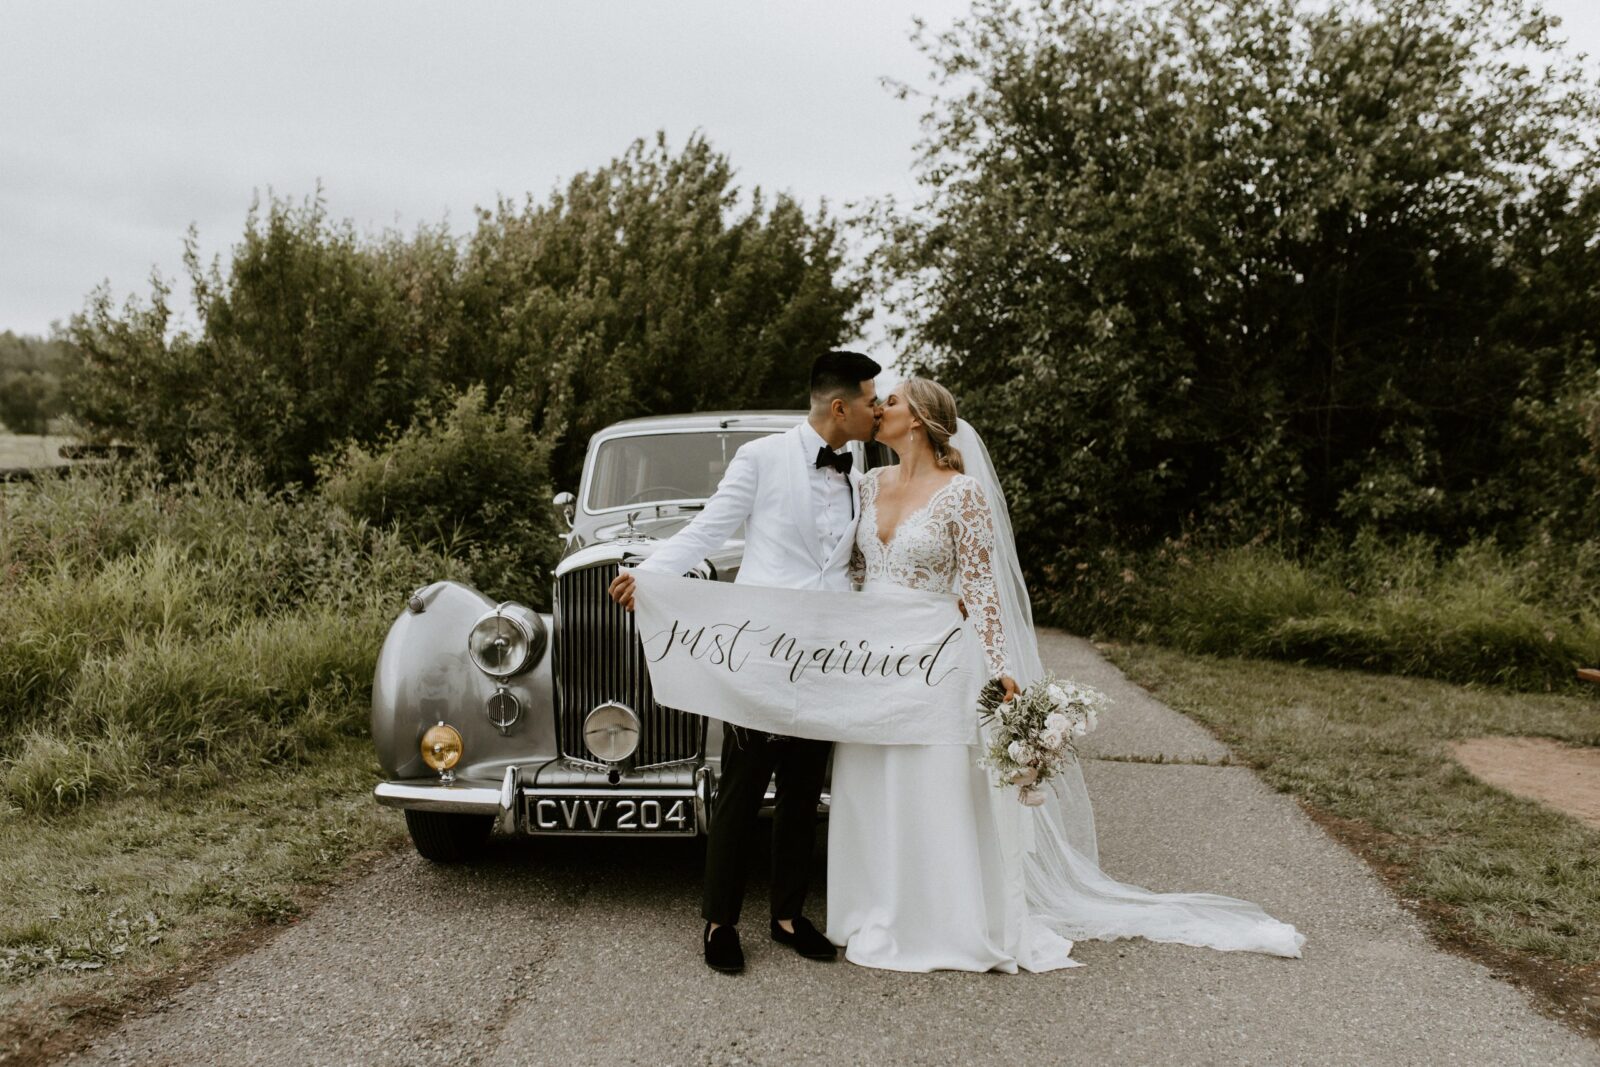 VINTAGE GLAMOUR MEETS TIMELESS ROMANCE AT MEADOW MUSE // STACEY & MICHAEL